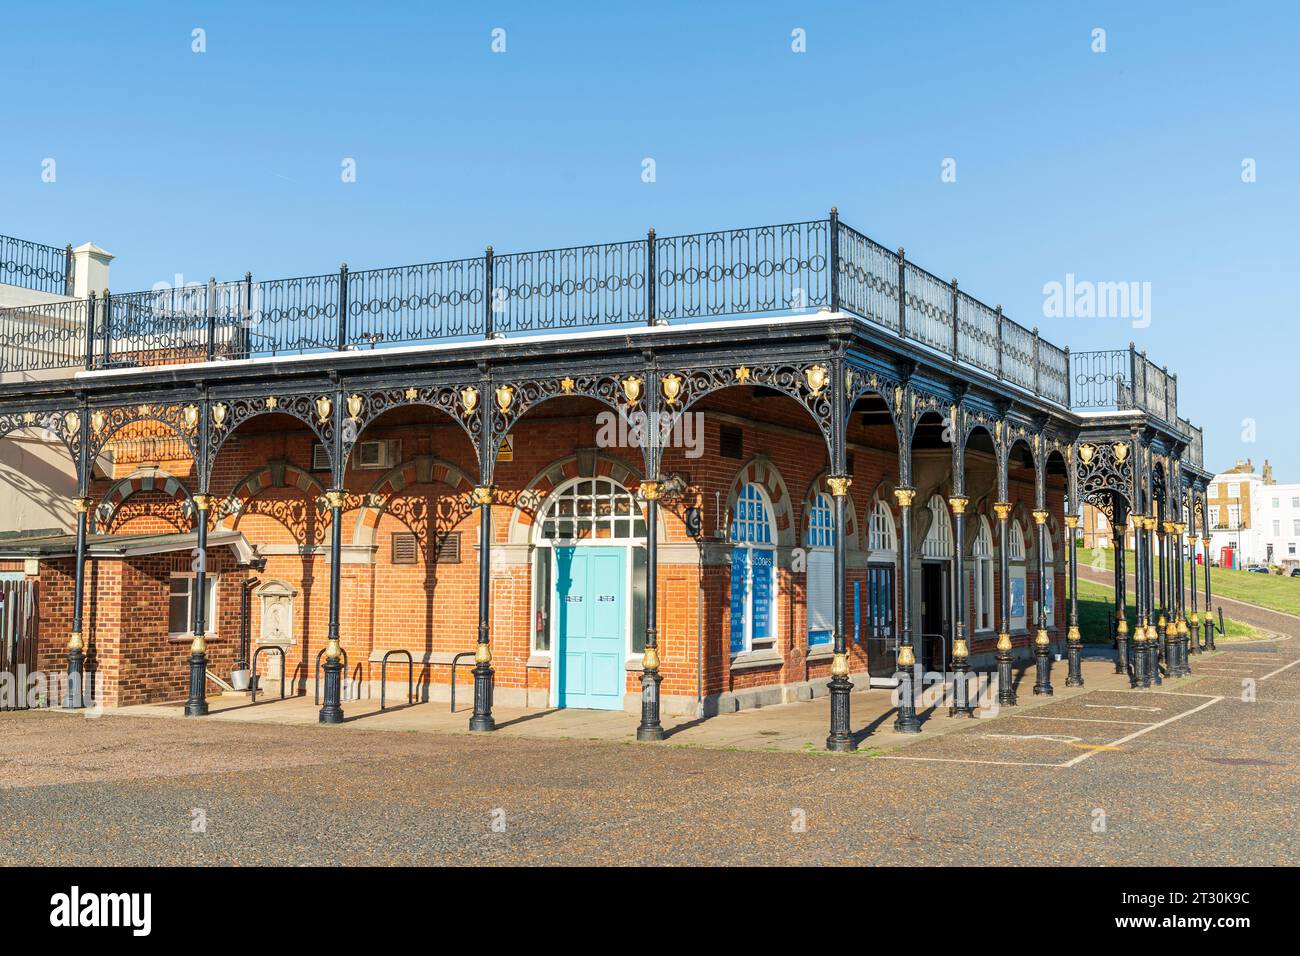 The King's Hall, Edwardian period concert building with ornate metal columns around the outside and rooftop balustrade. Herne Bay seafront. Blue sky. Stock Photo